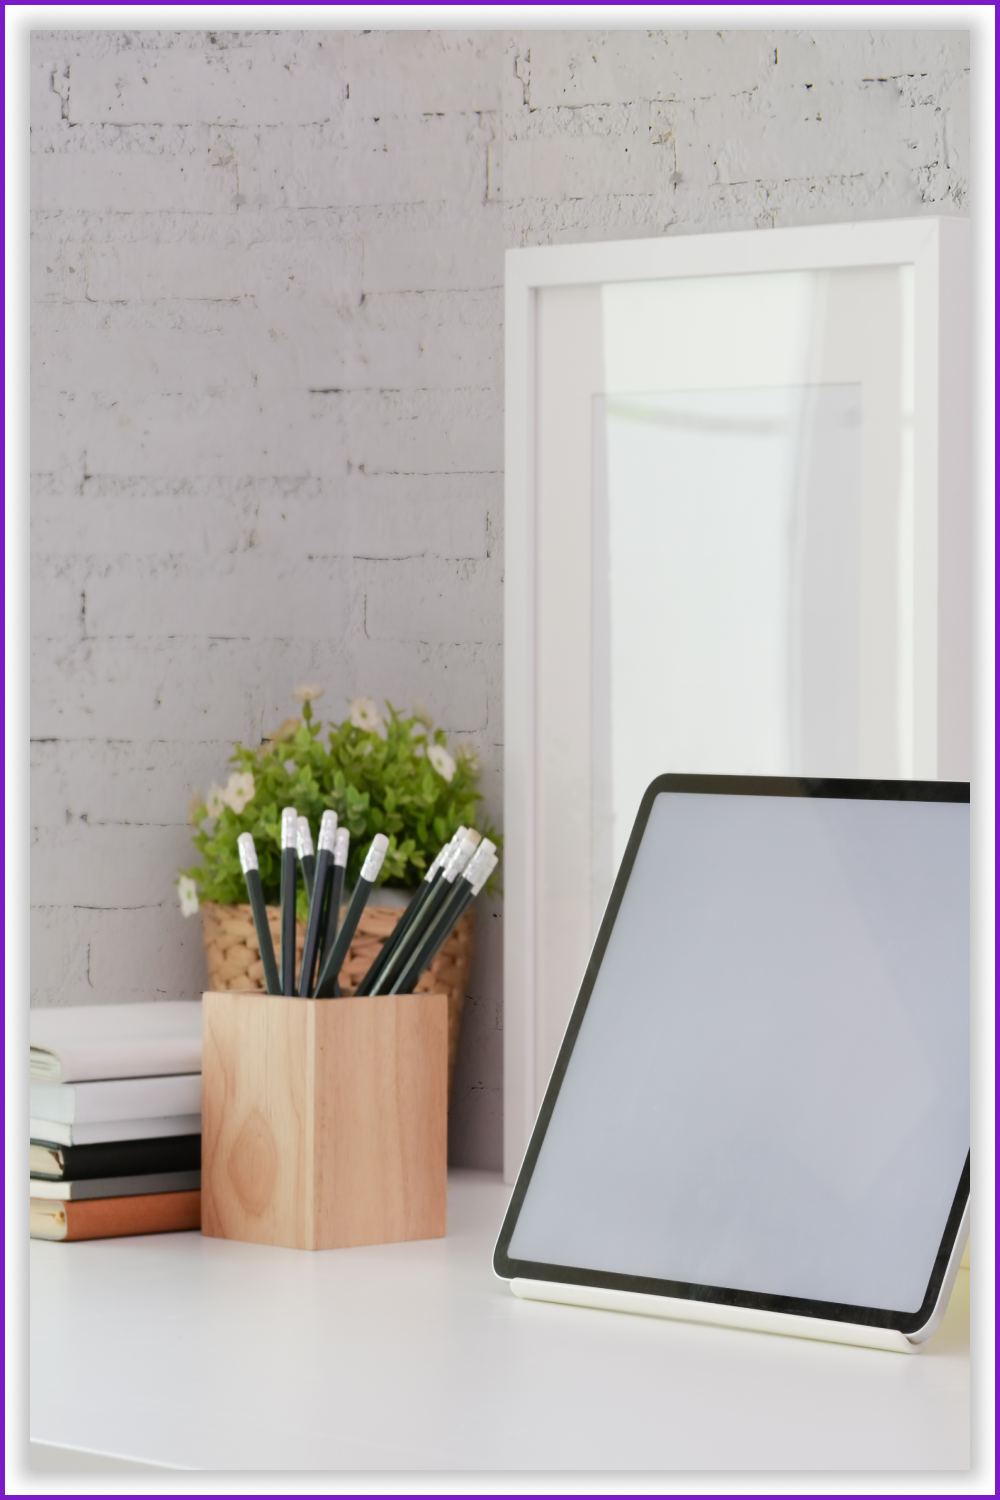 Tablet with a white screen on the table and a vase of pencils.